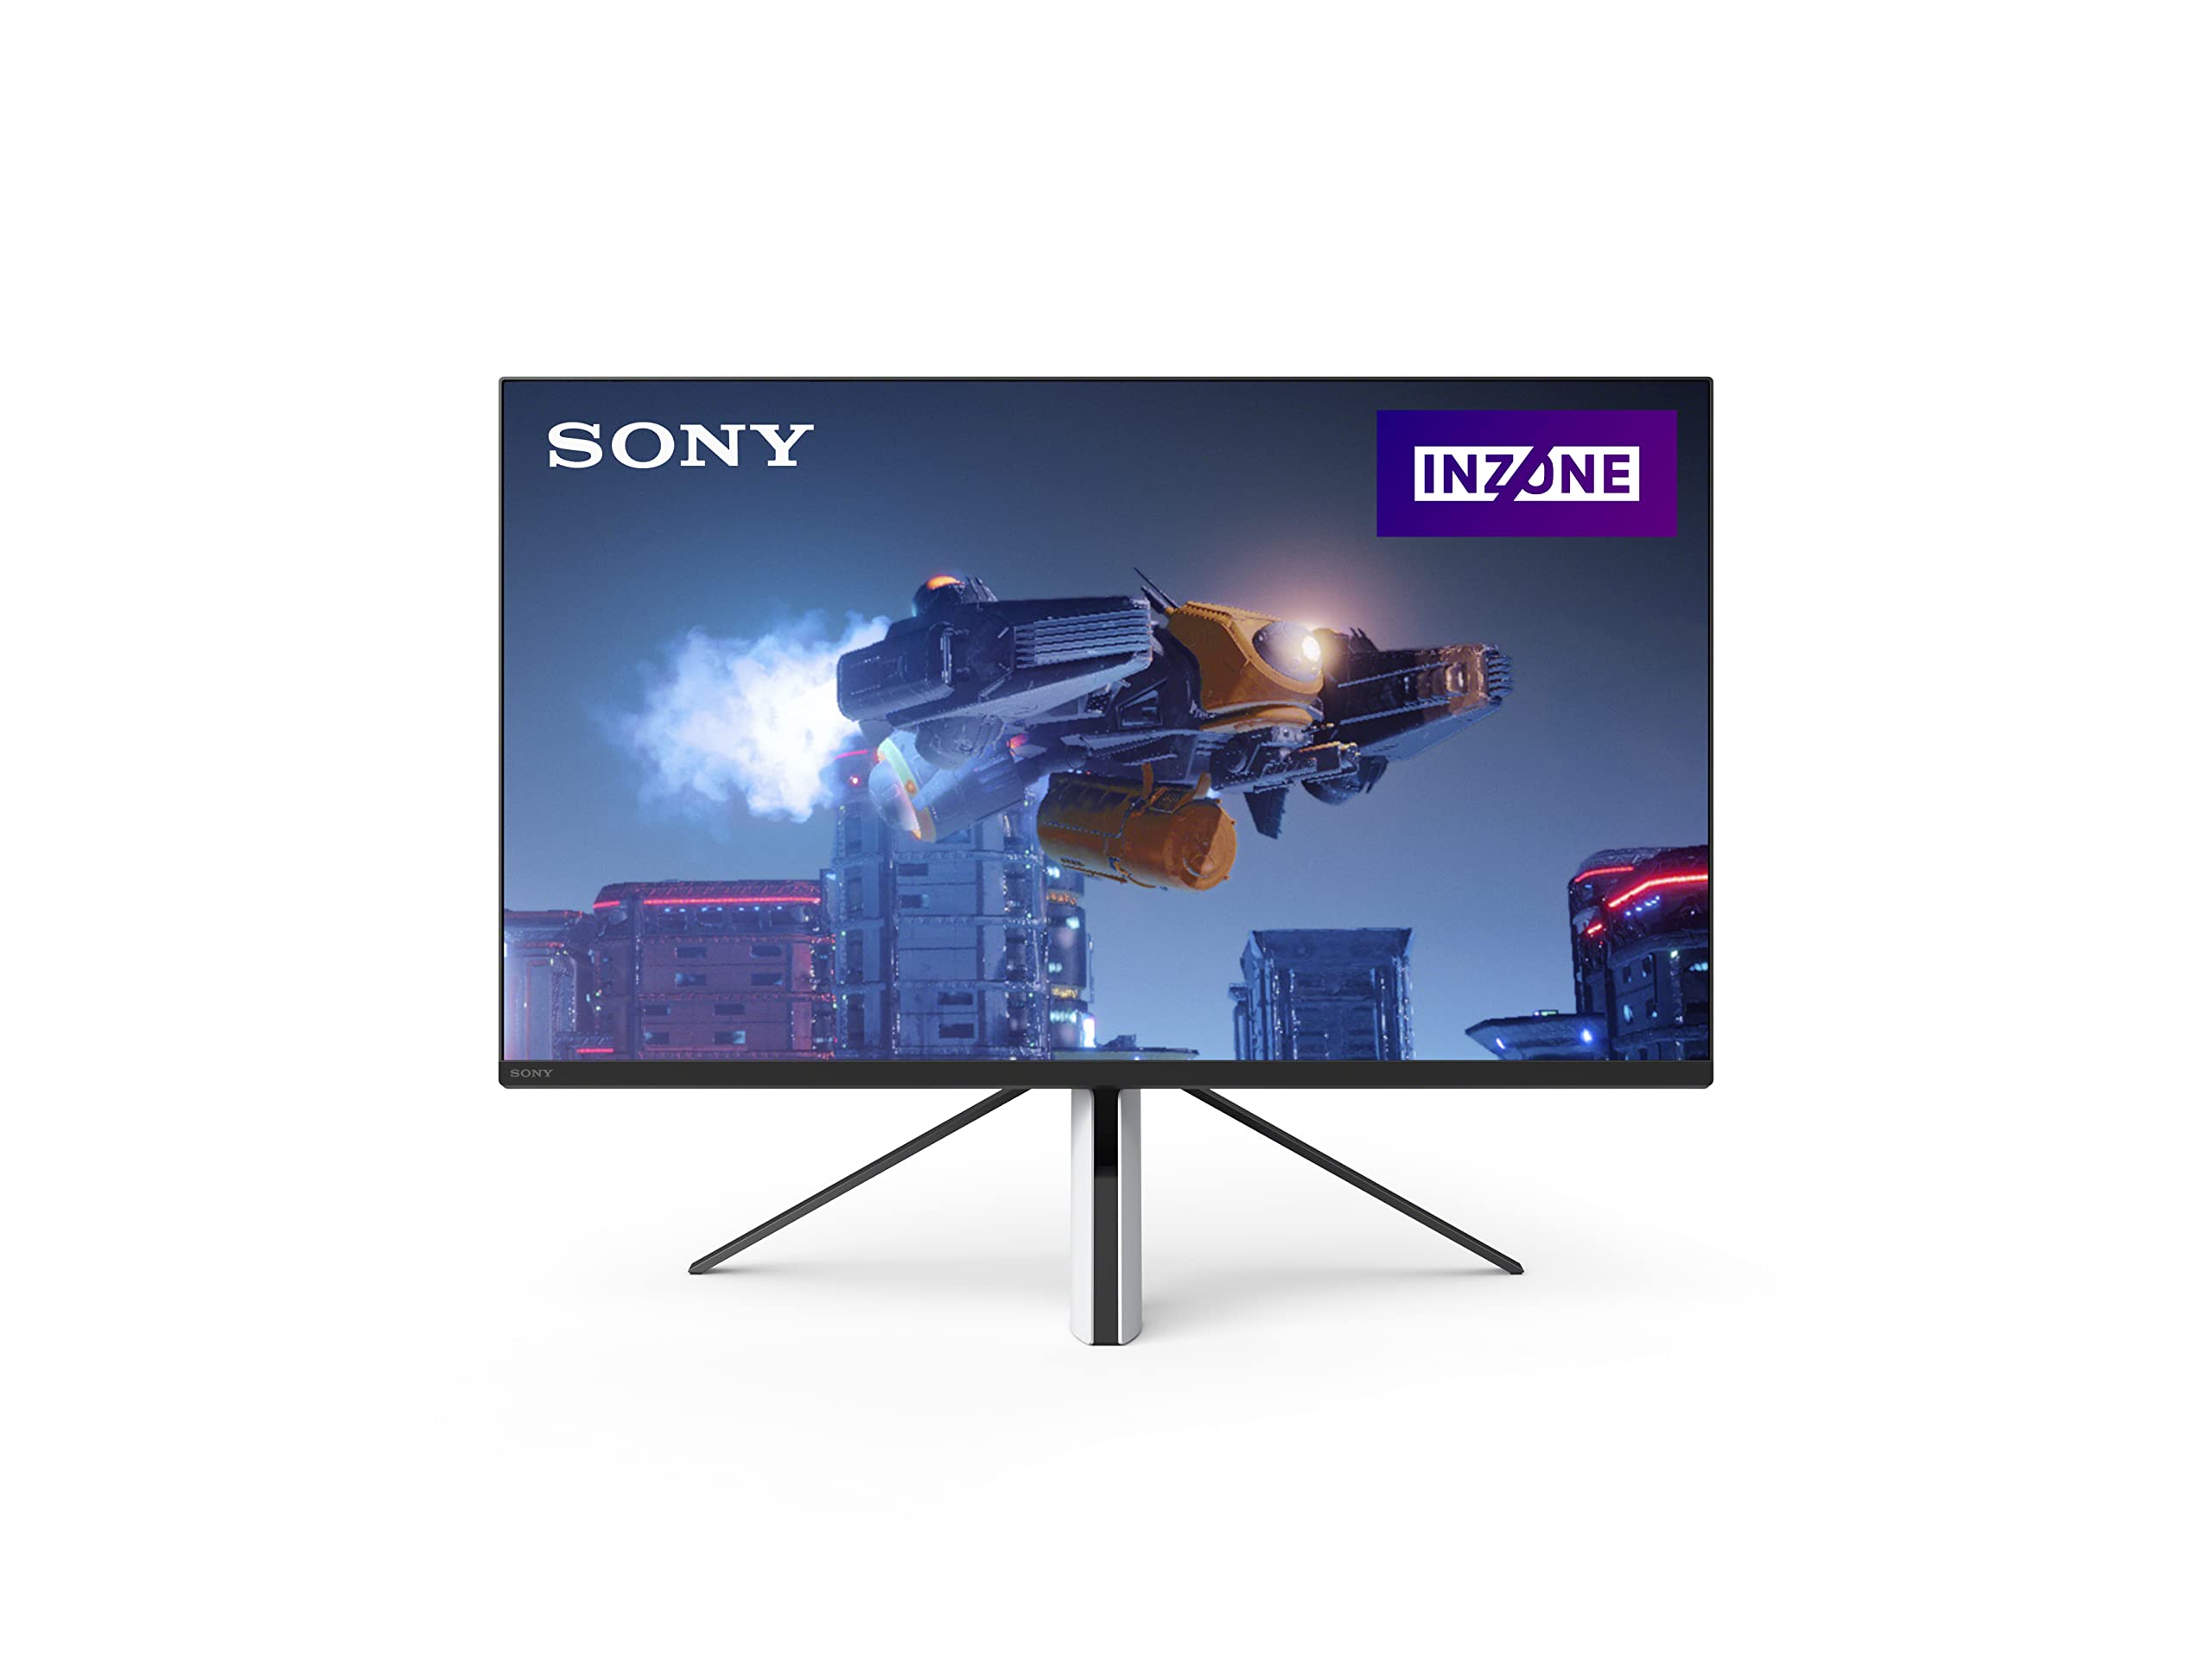 Sony 27” INZONE M3 Full HD HDR 240Hz Gaming Monitor with NVIDIA G-SYNC and HDMI 2.1 VRR, Black